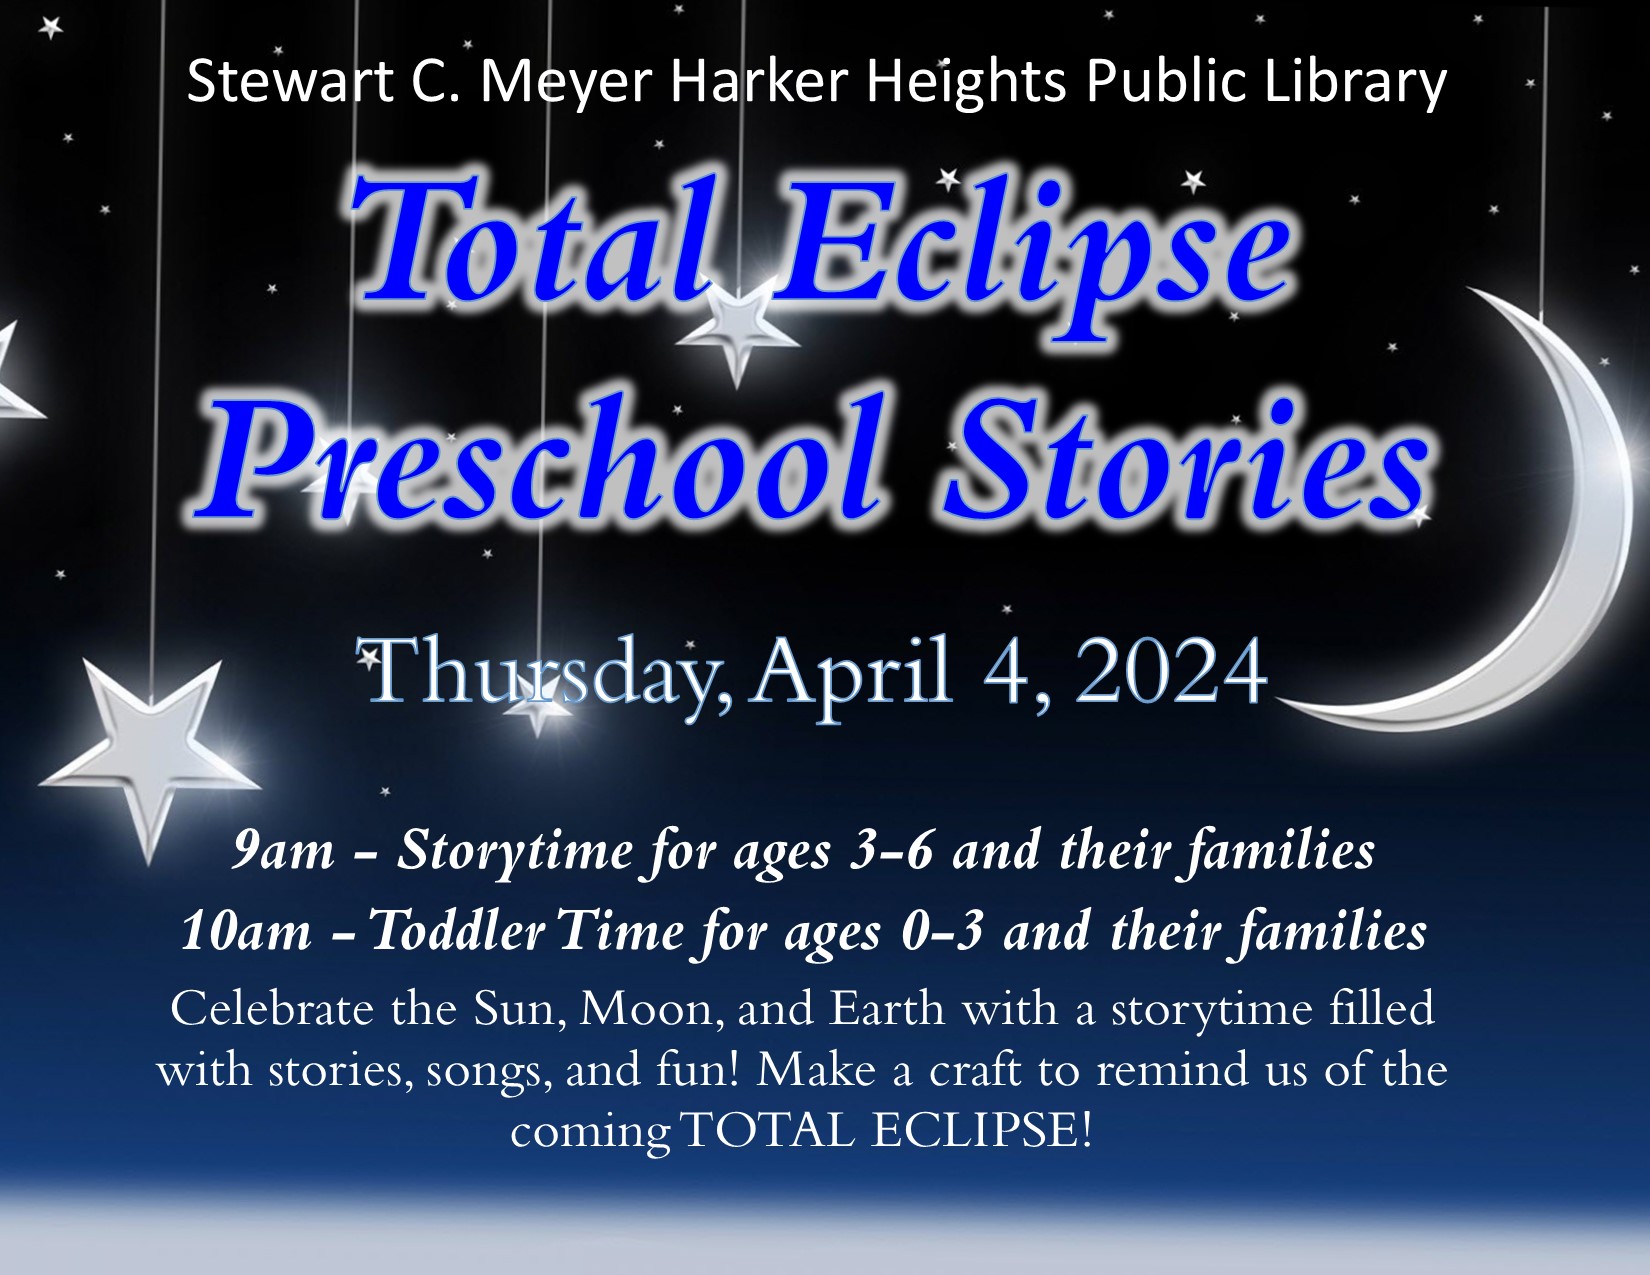 Eclipse Sun Moon and Stars storytime